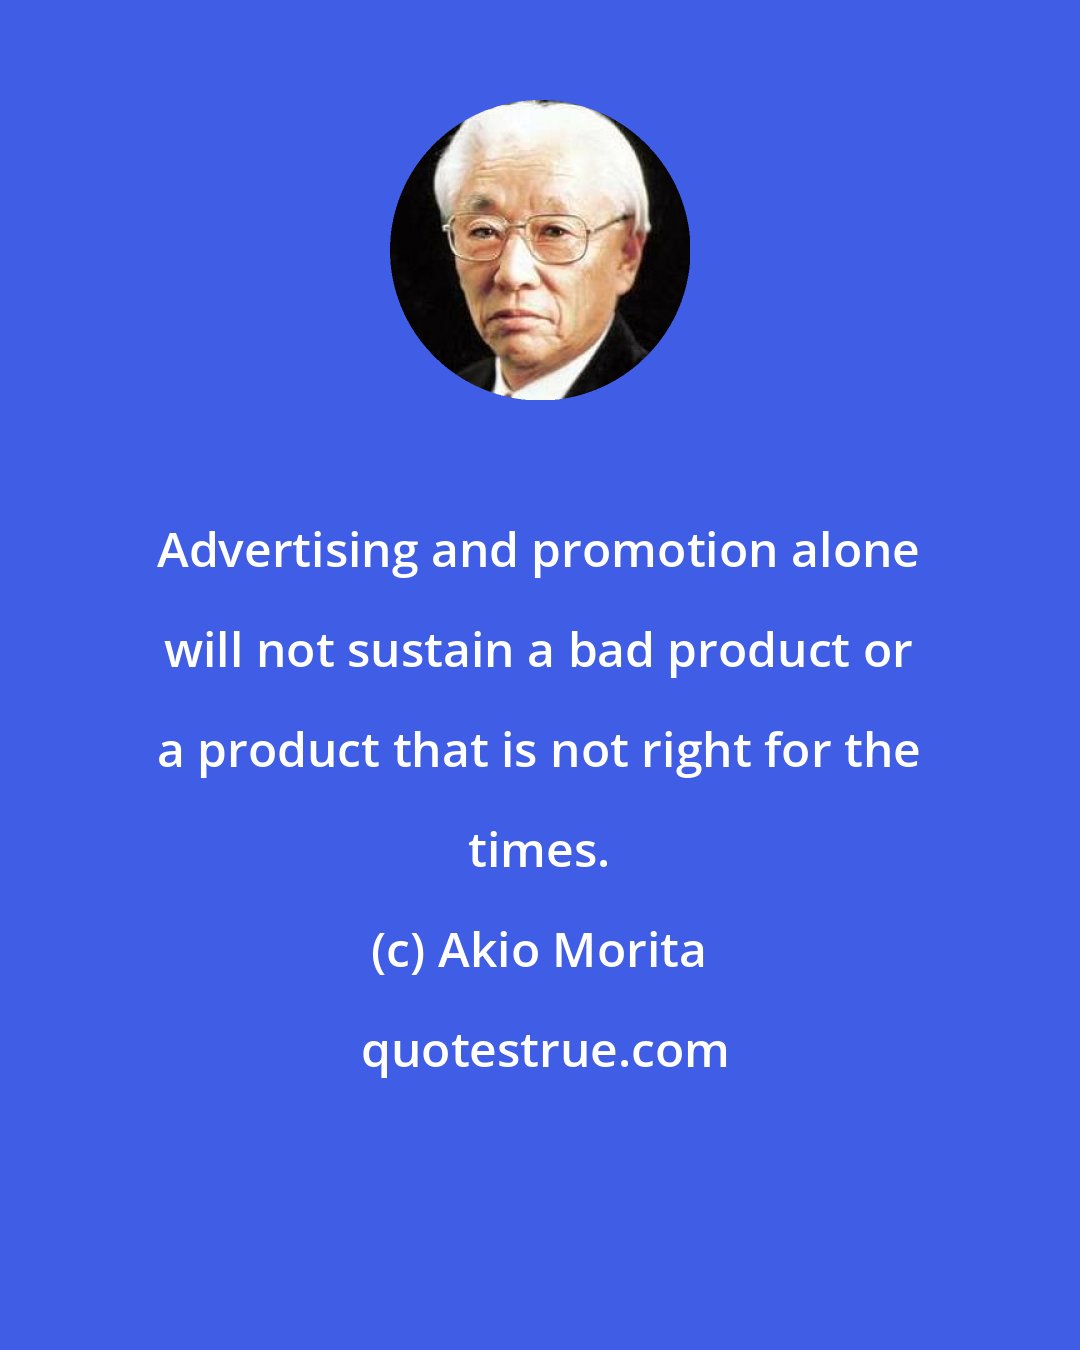 Akio Morita: Advertising and promotion alone will not sustain a bad product or a product that is not right for the times.